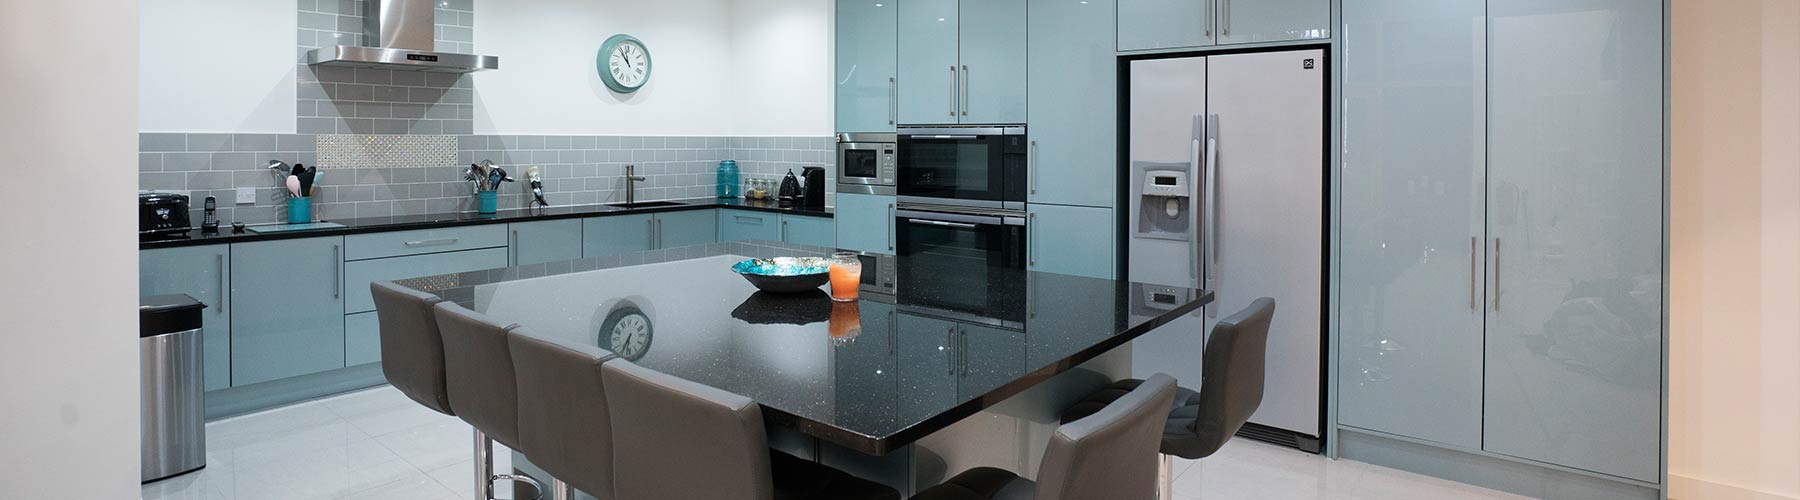 Large kitchen with blue gloss slab doors and stainless steel handles.